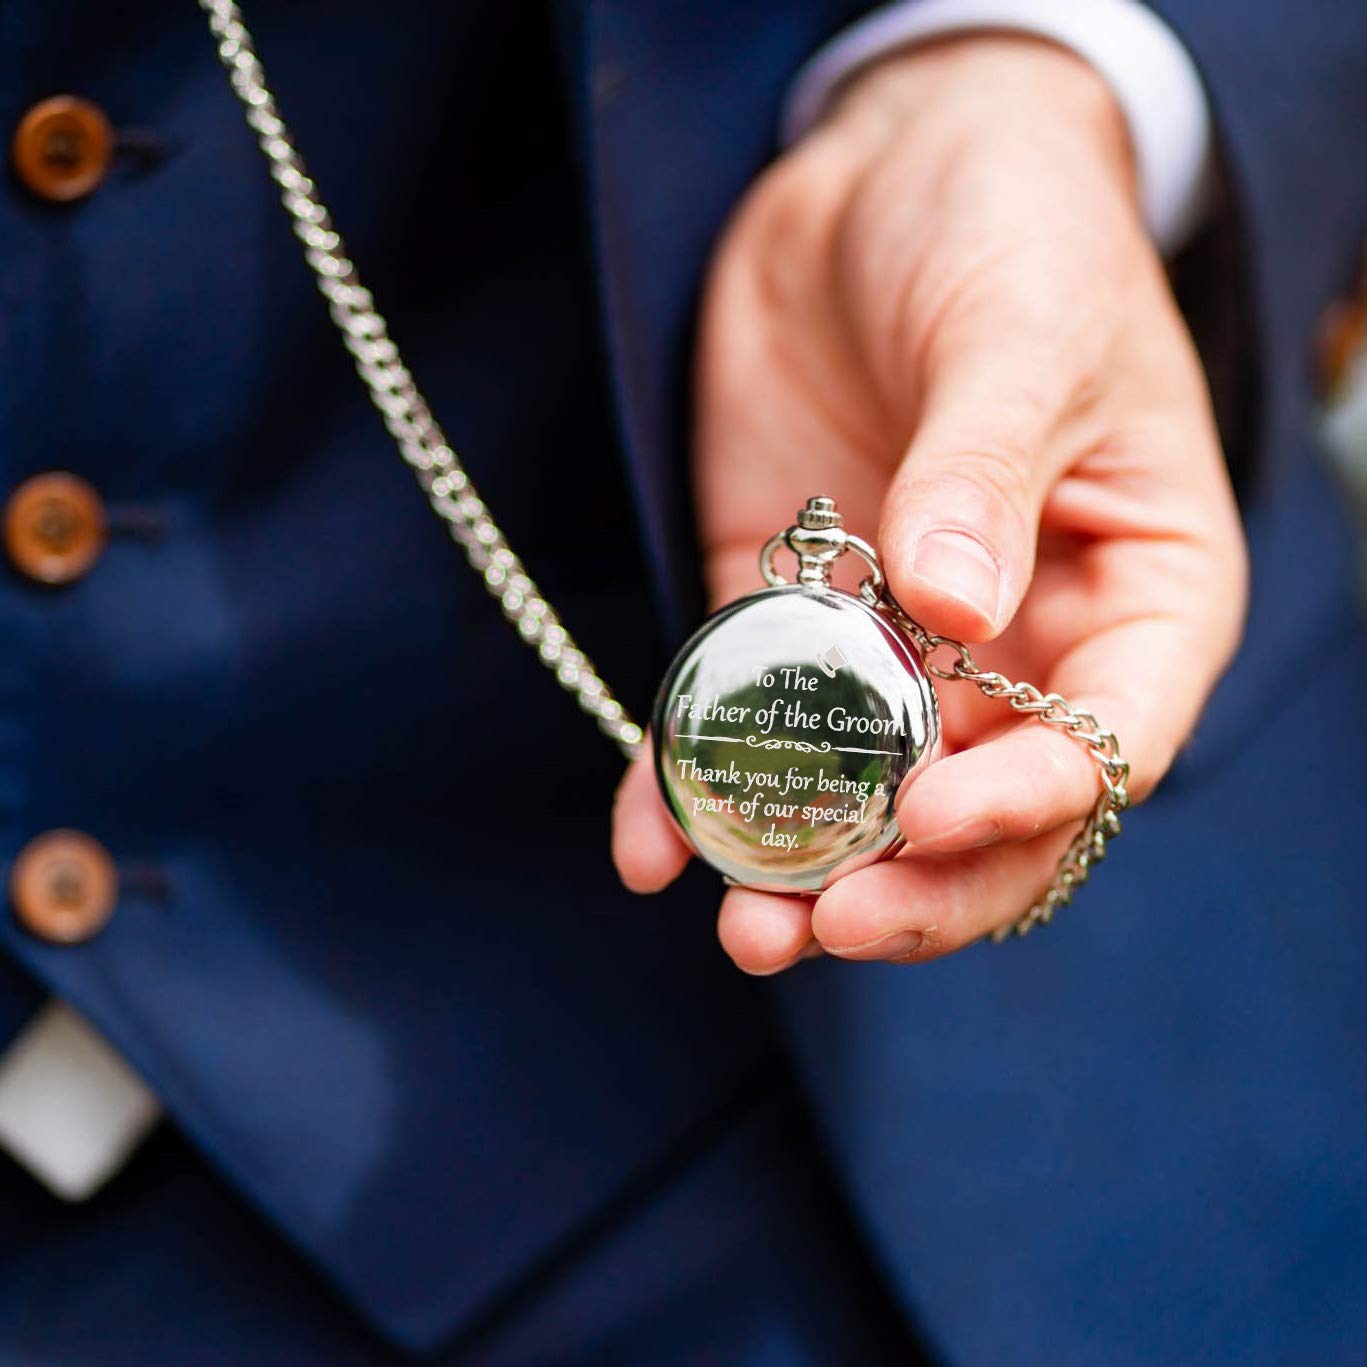 FJ FREDERICK JAMES Father of The Groom Gifts - Engraved 'Father of The Groom' Pocket Watch - Wedding Gifts for Father of The Groom from Groom & Bride